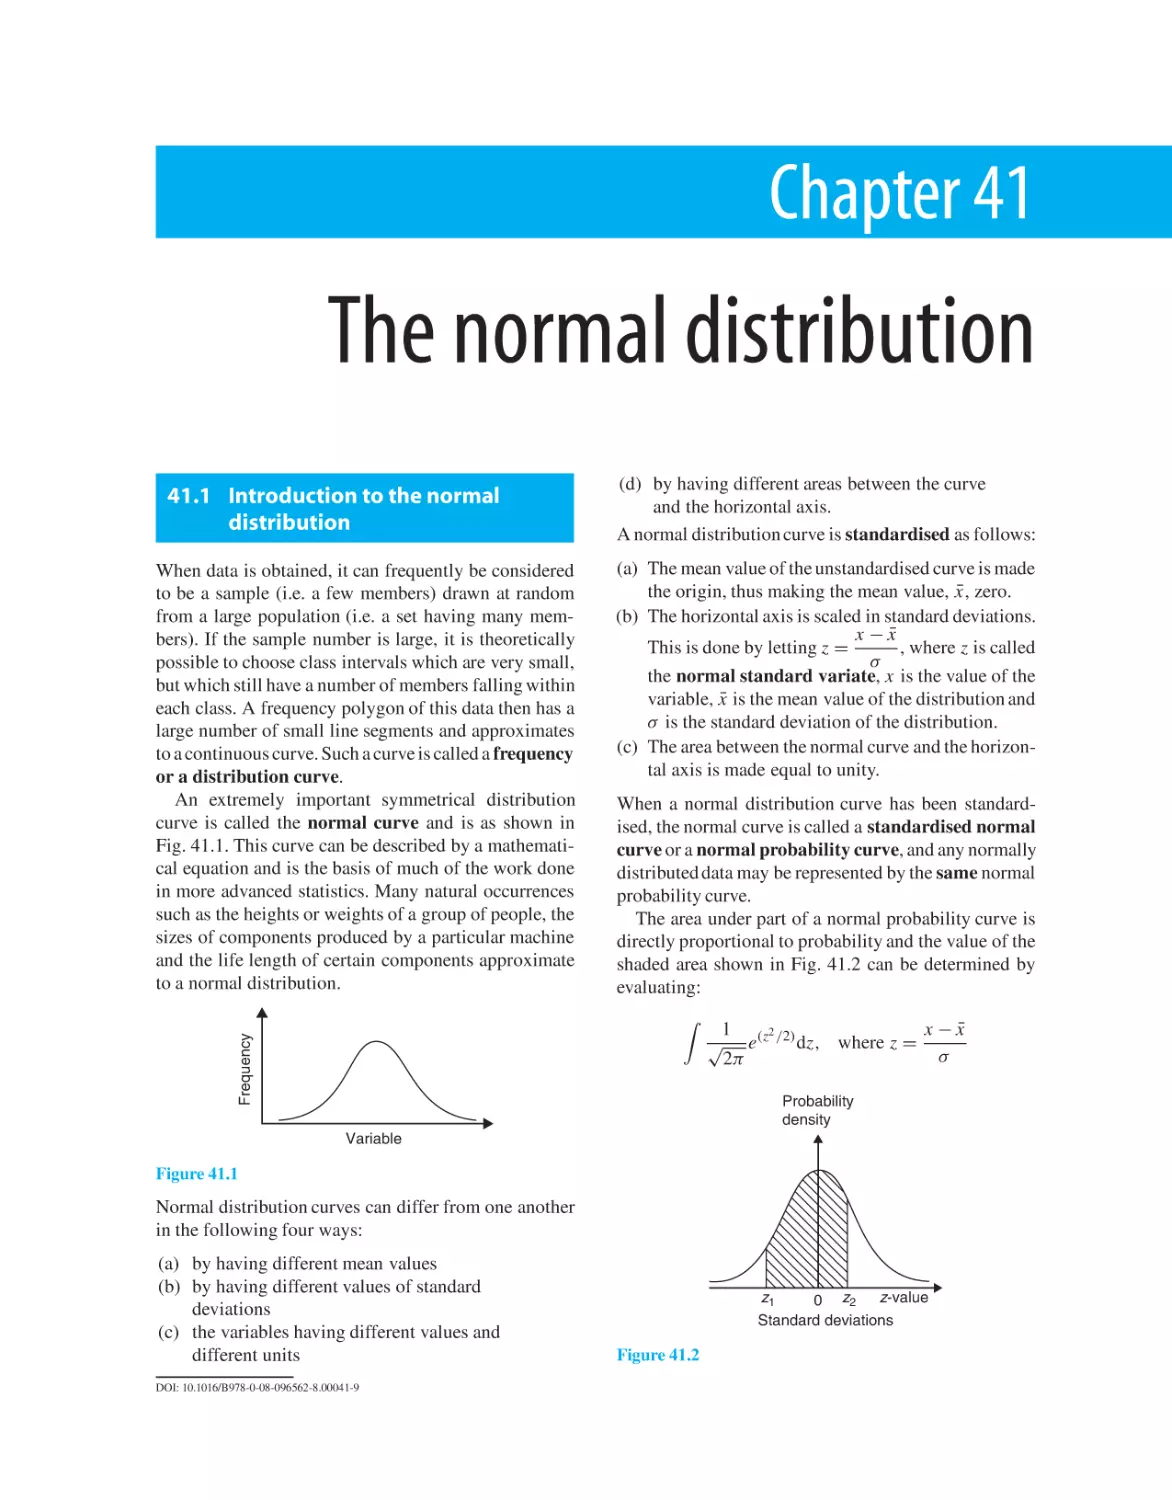 Chapter 41. The normal distribution
41.1 Introduction to the normal distribution